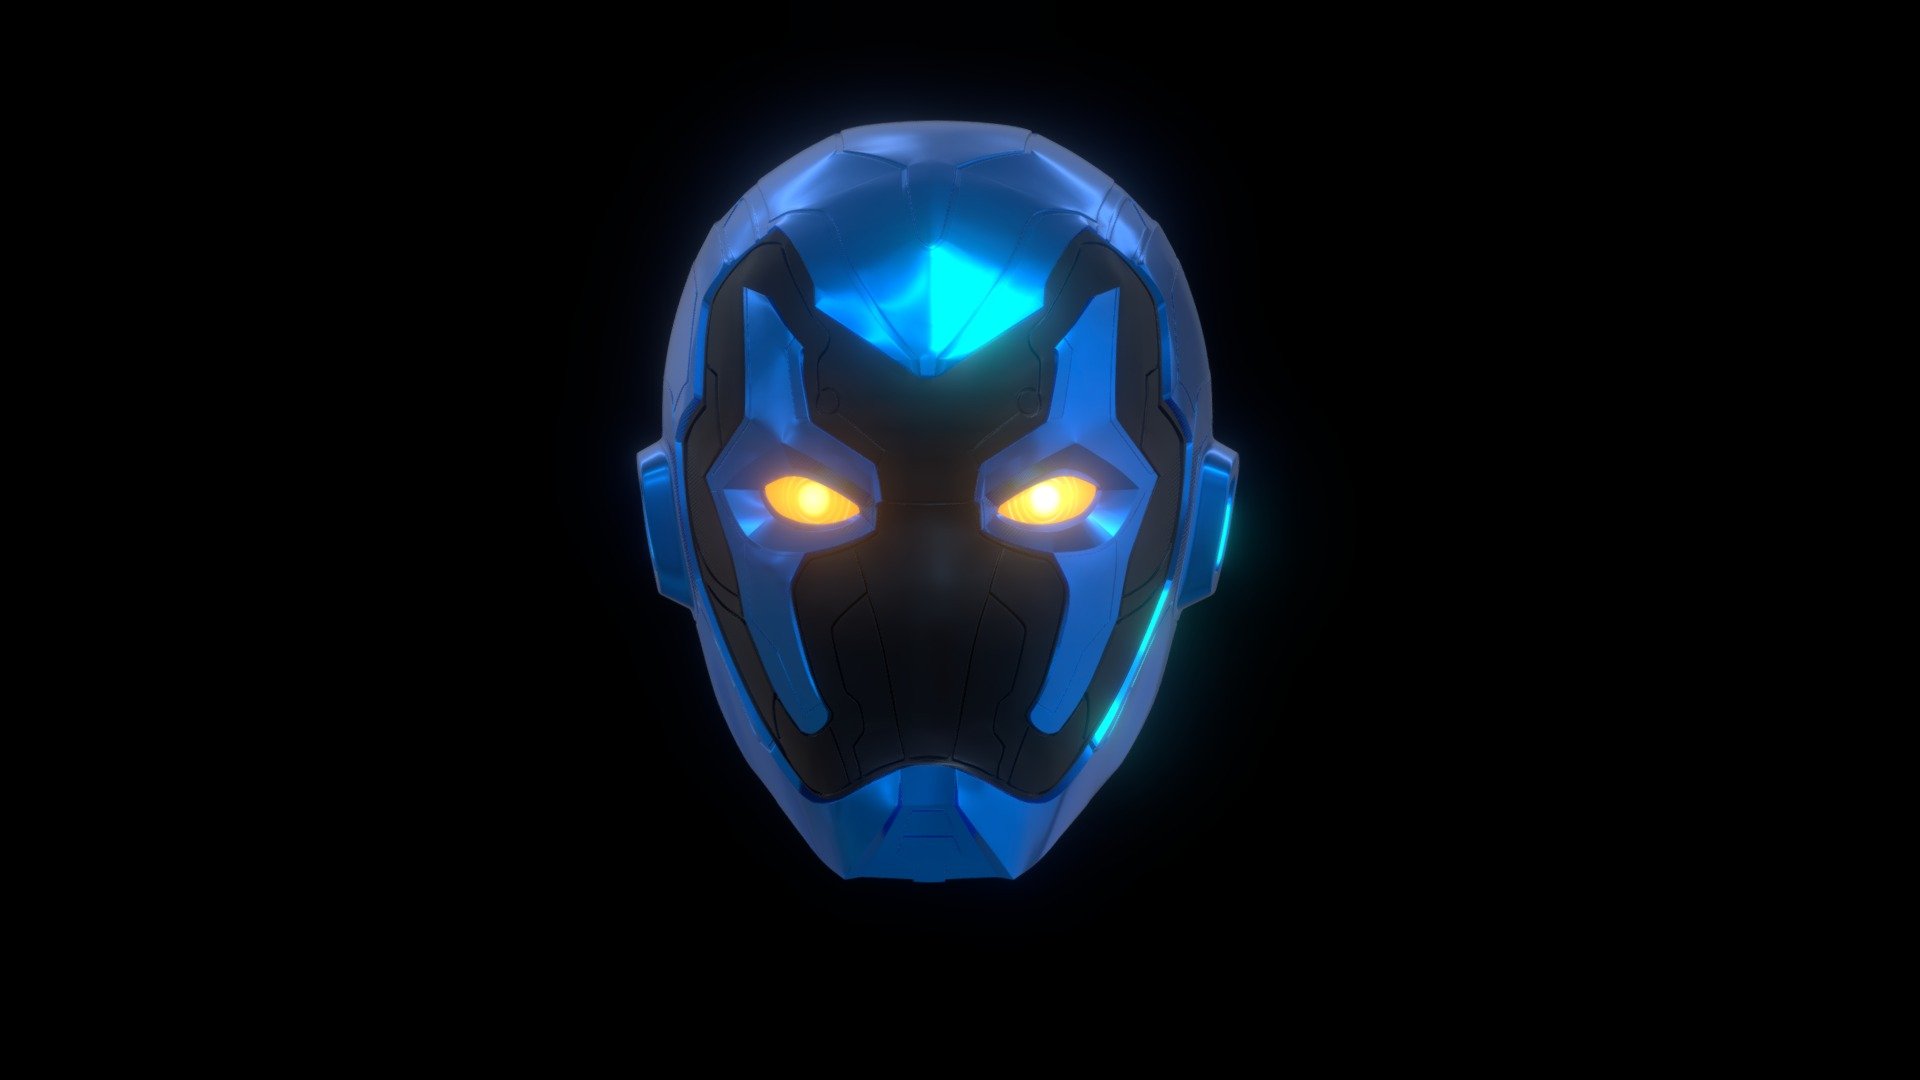 The BlueBeetle Head 3D Model is a highly detailed,  replica of the head of the blue beetle, a DC comics Character, has a set of unique abilities that make him one of the most powerful Teen Titans members. The scarab's alien technology provides him with a distinctive blue armor. While in the armor, Jaime has enhanced durability, superhuman strength, stamina, accelerated healing, and the ability to fly. The model is meant to be a decorative piece and can be used in 3D modeling software, games etc&hellip; - BlueBeetle_ Movie_ Helmet - Download Free 3D model by Febin.Joy 3d model